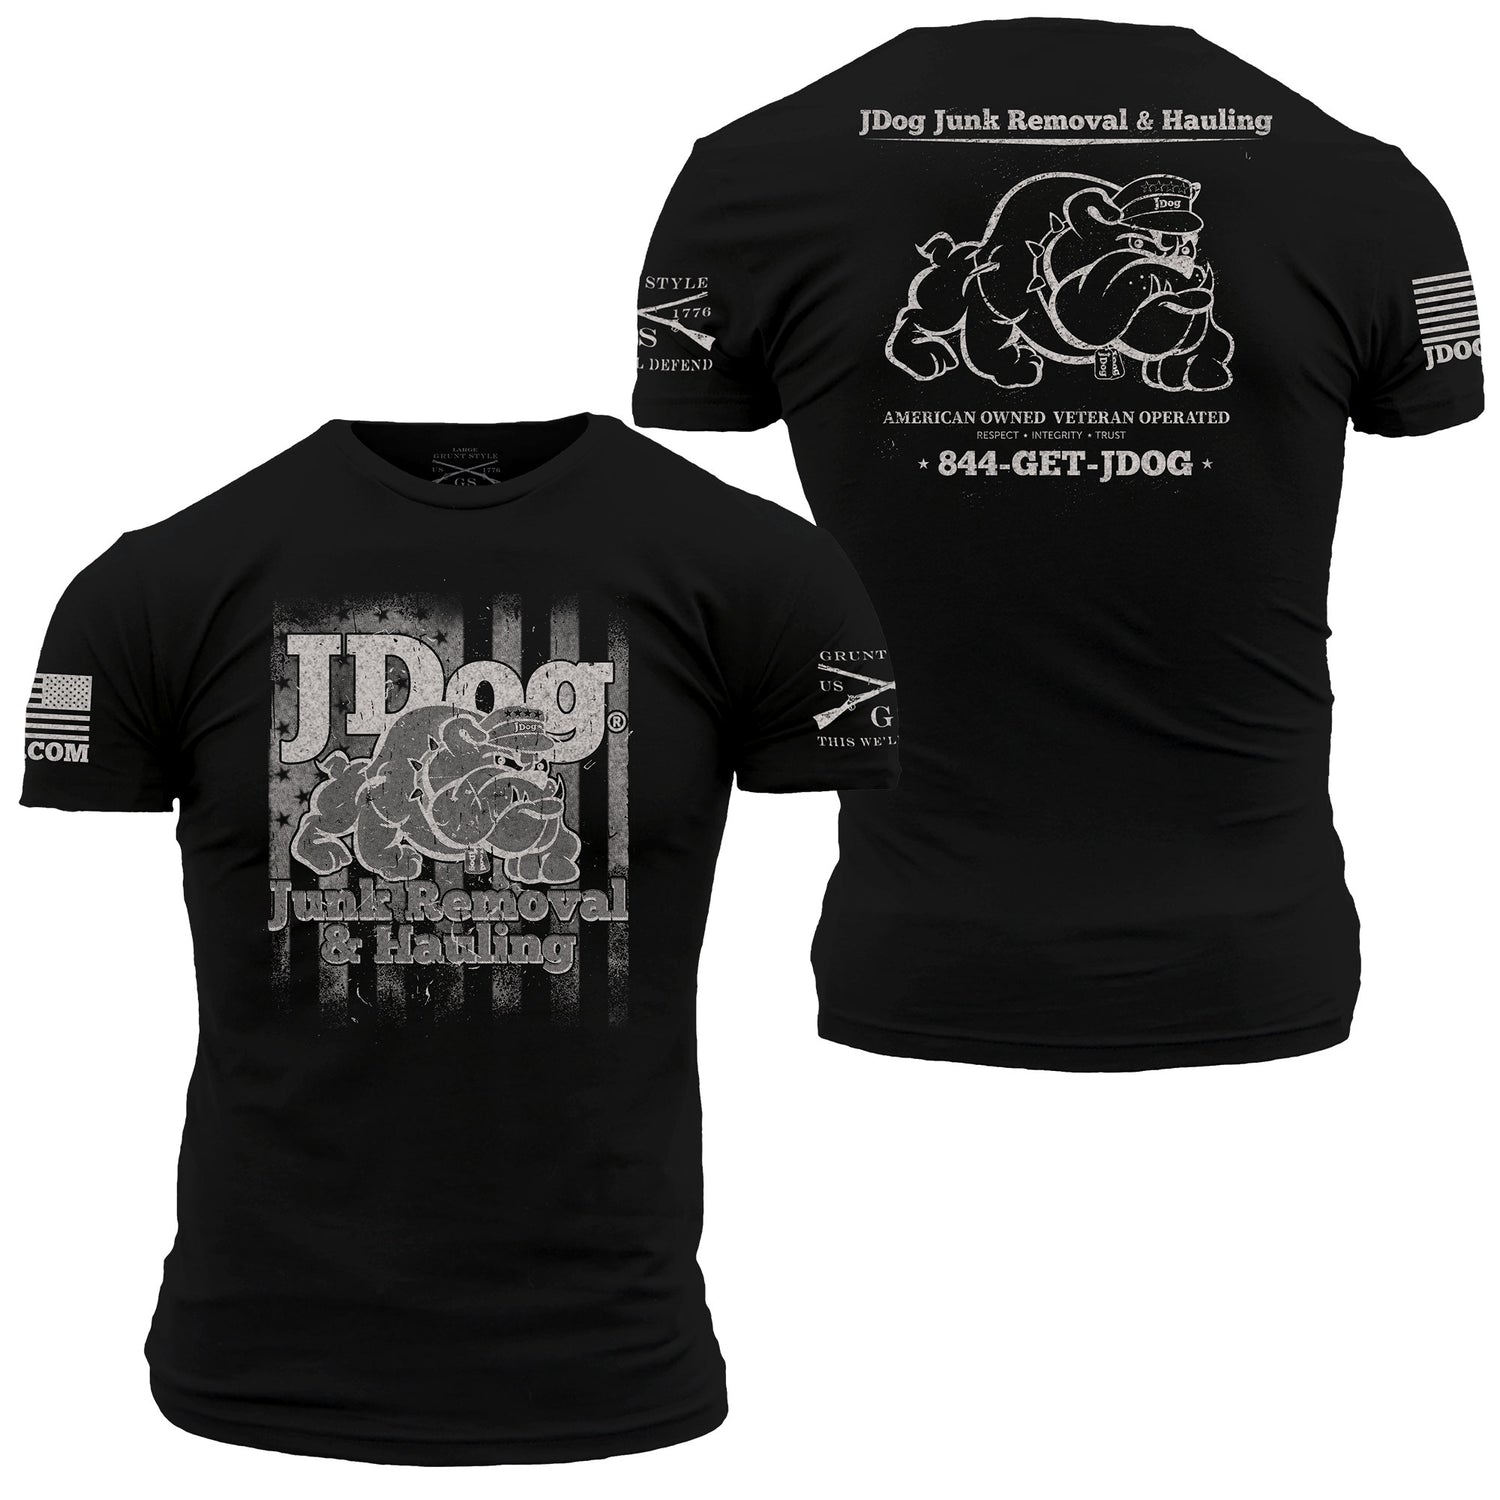 JDog Junk Removal and Haul Graphic Black Tee | Grunt Style 